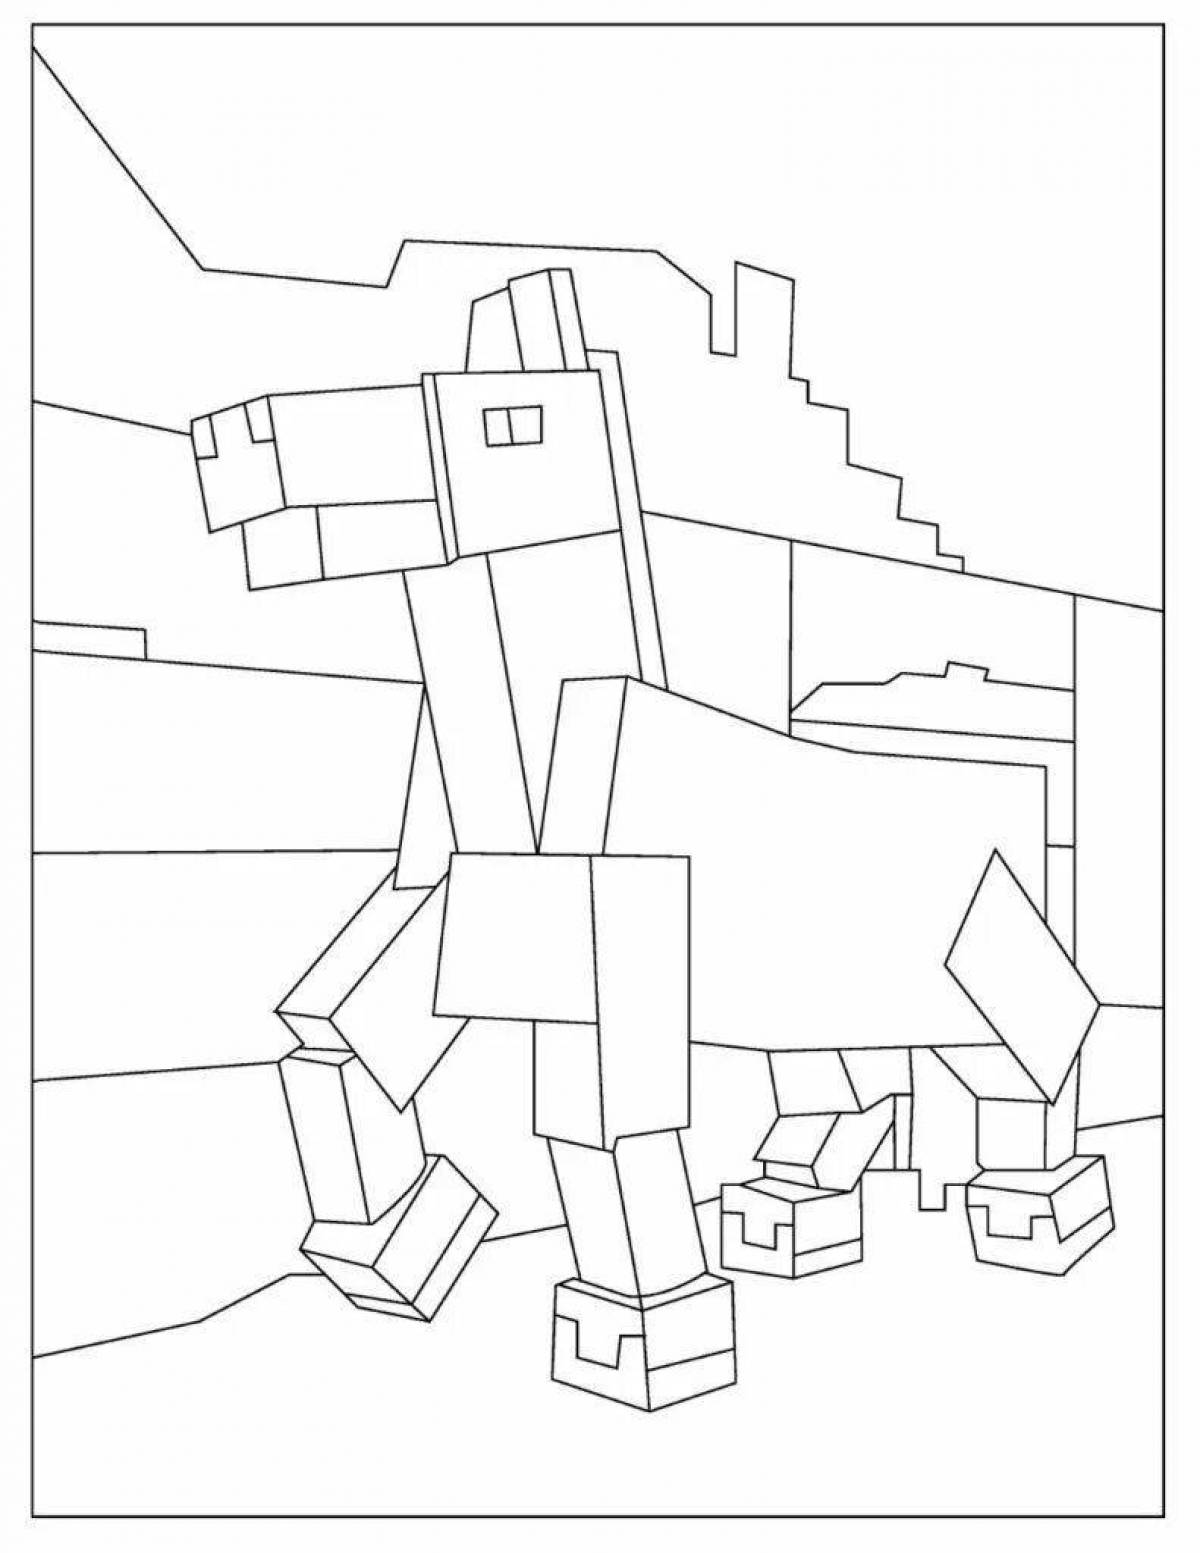 Minecraft bunny humorous coloring page